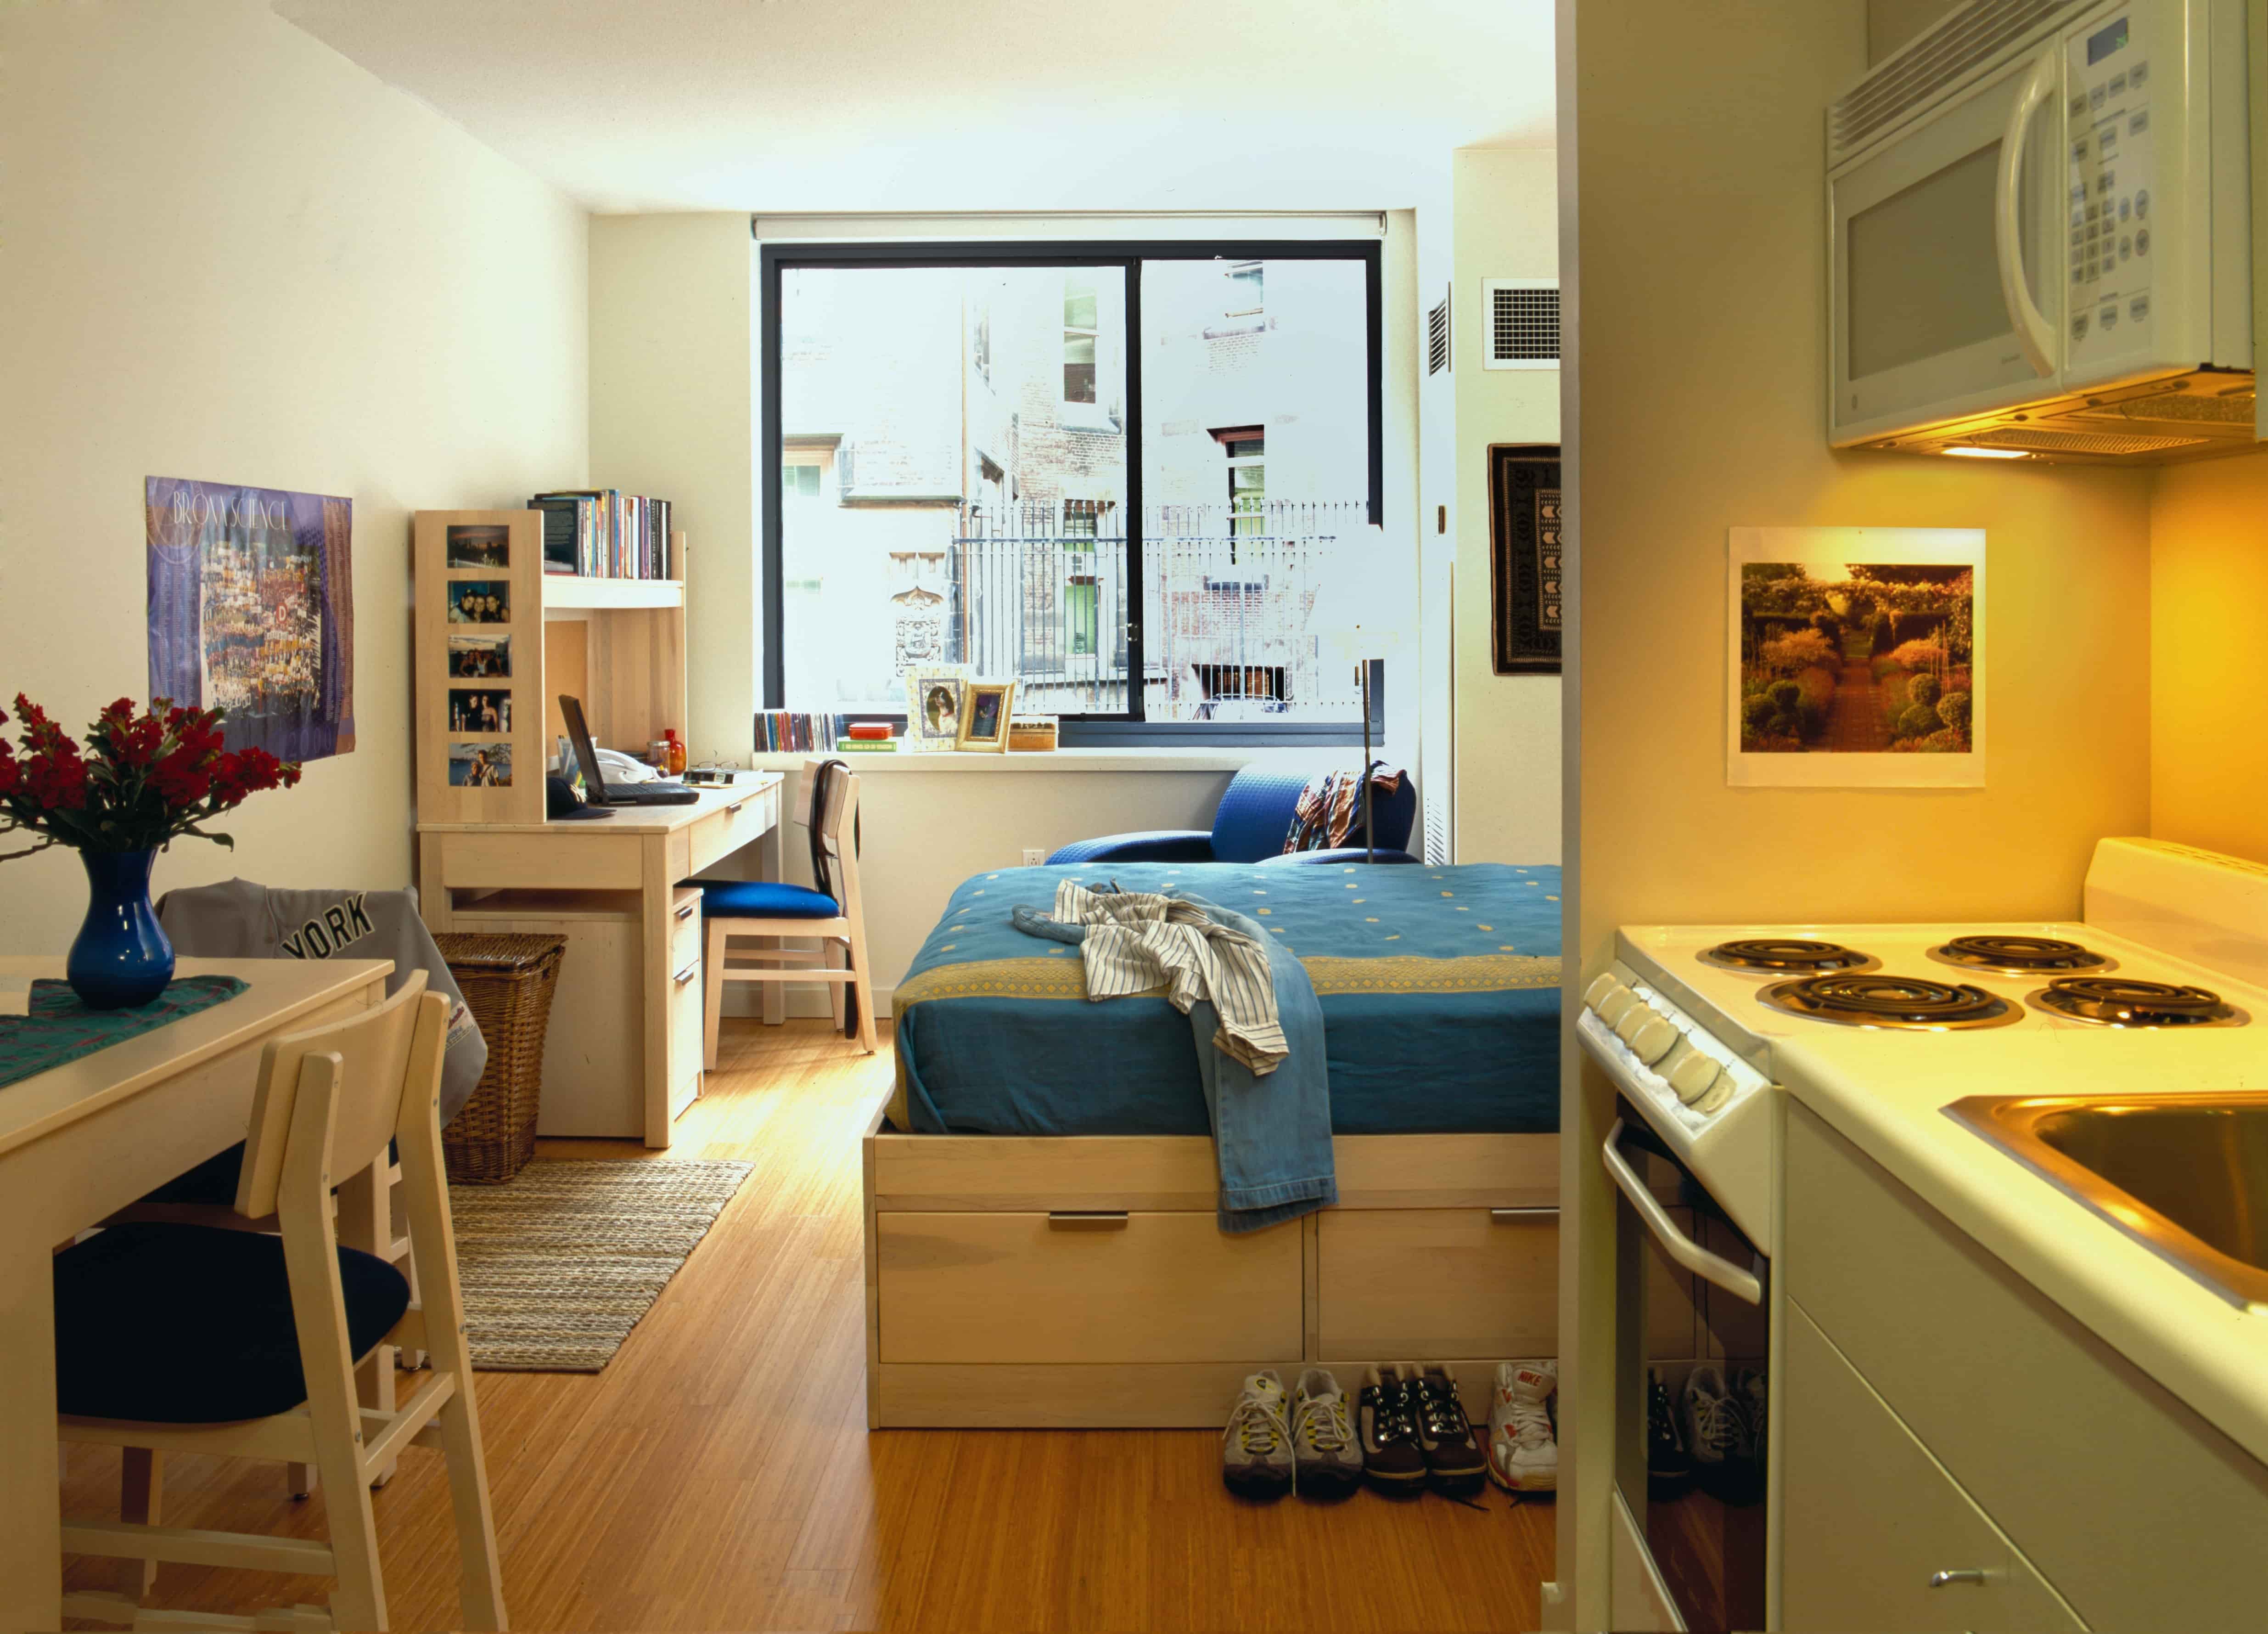 Living room and kitchenette in apartment.